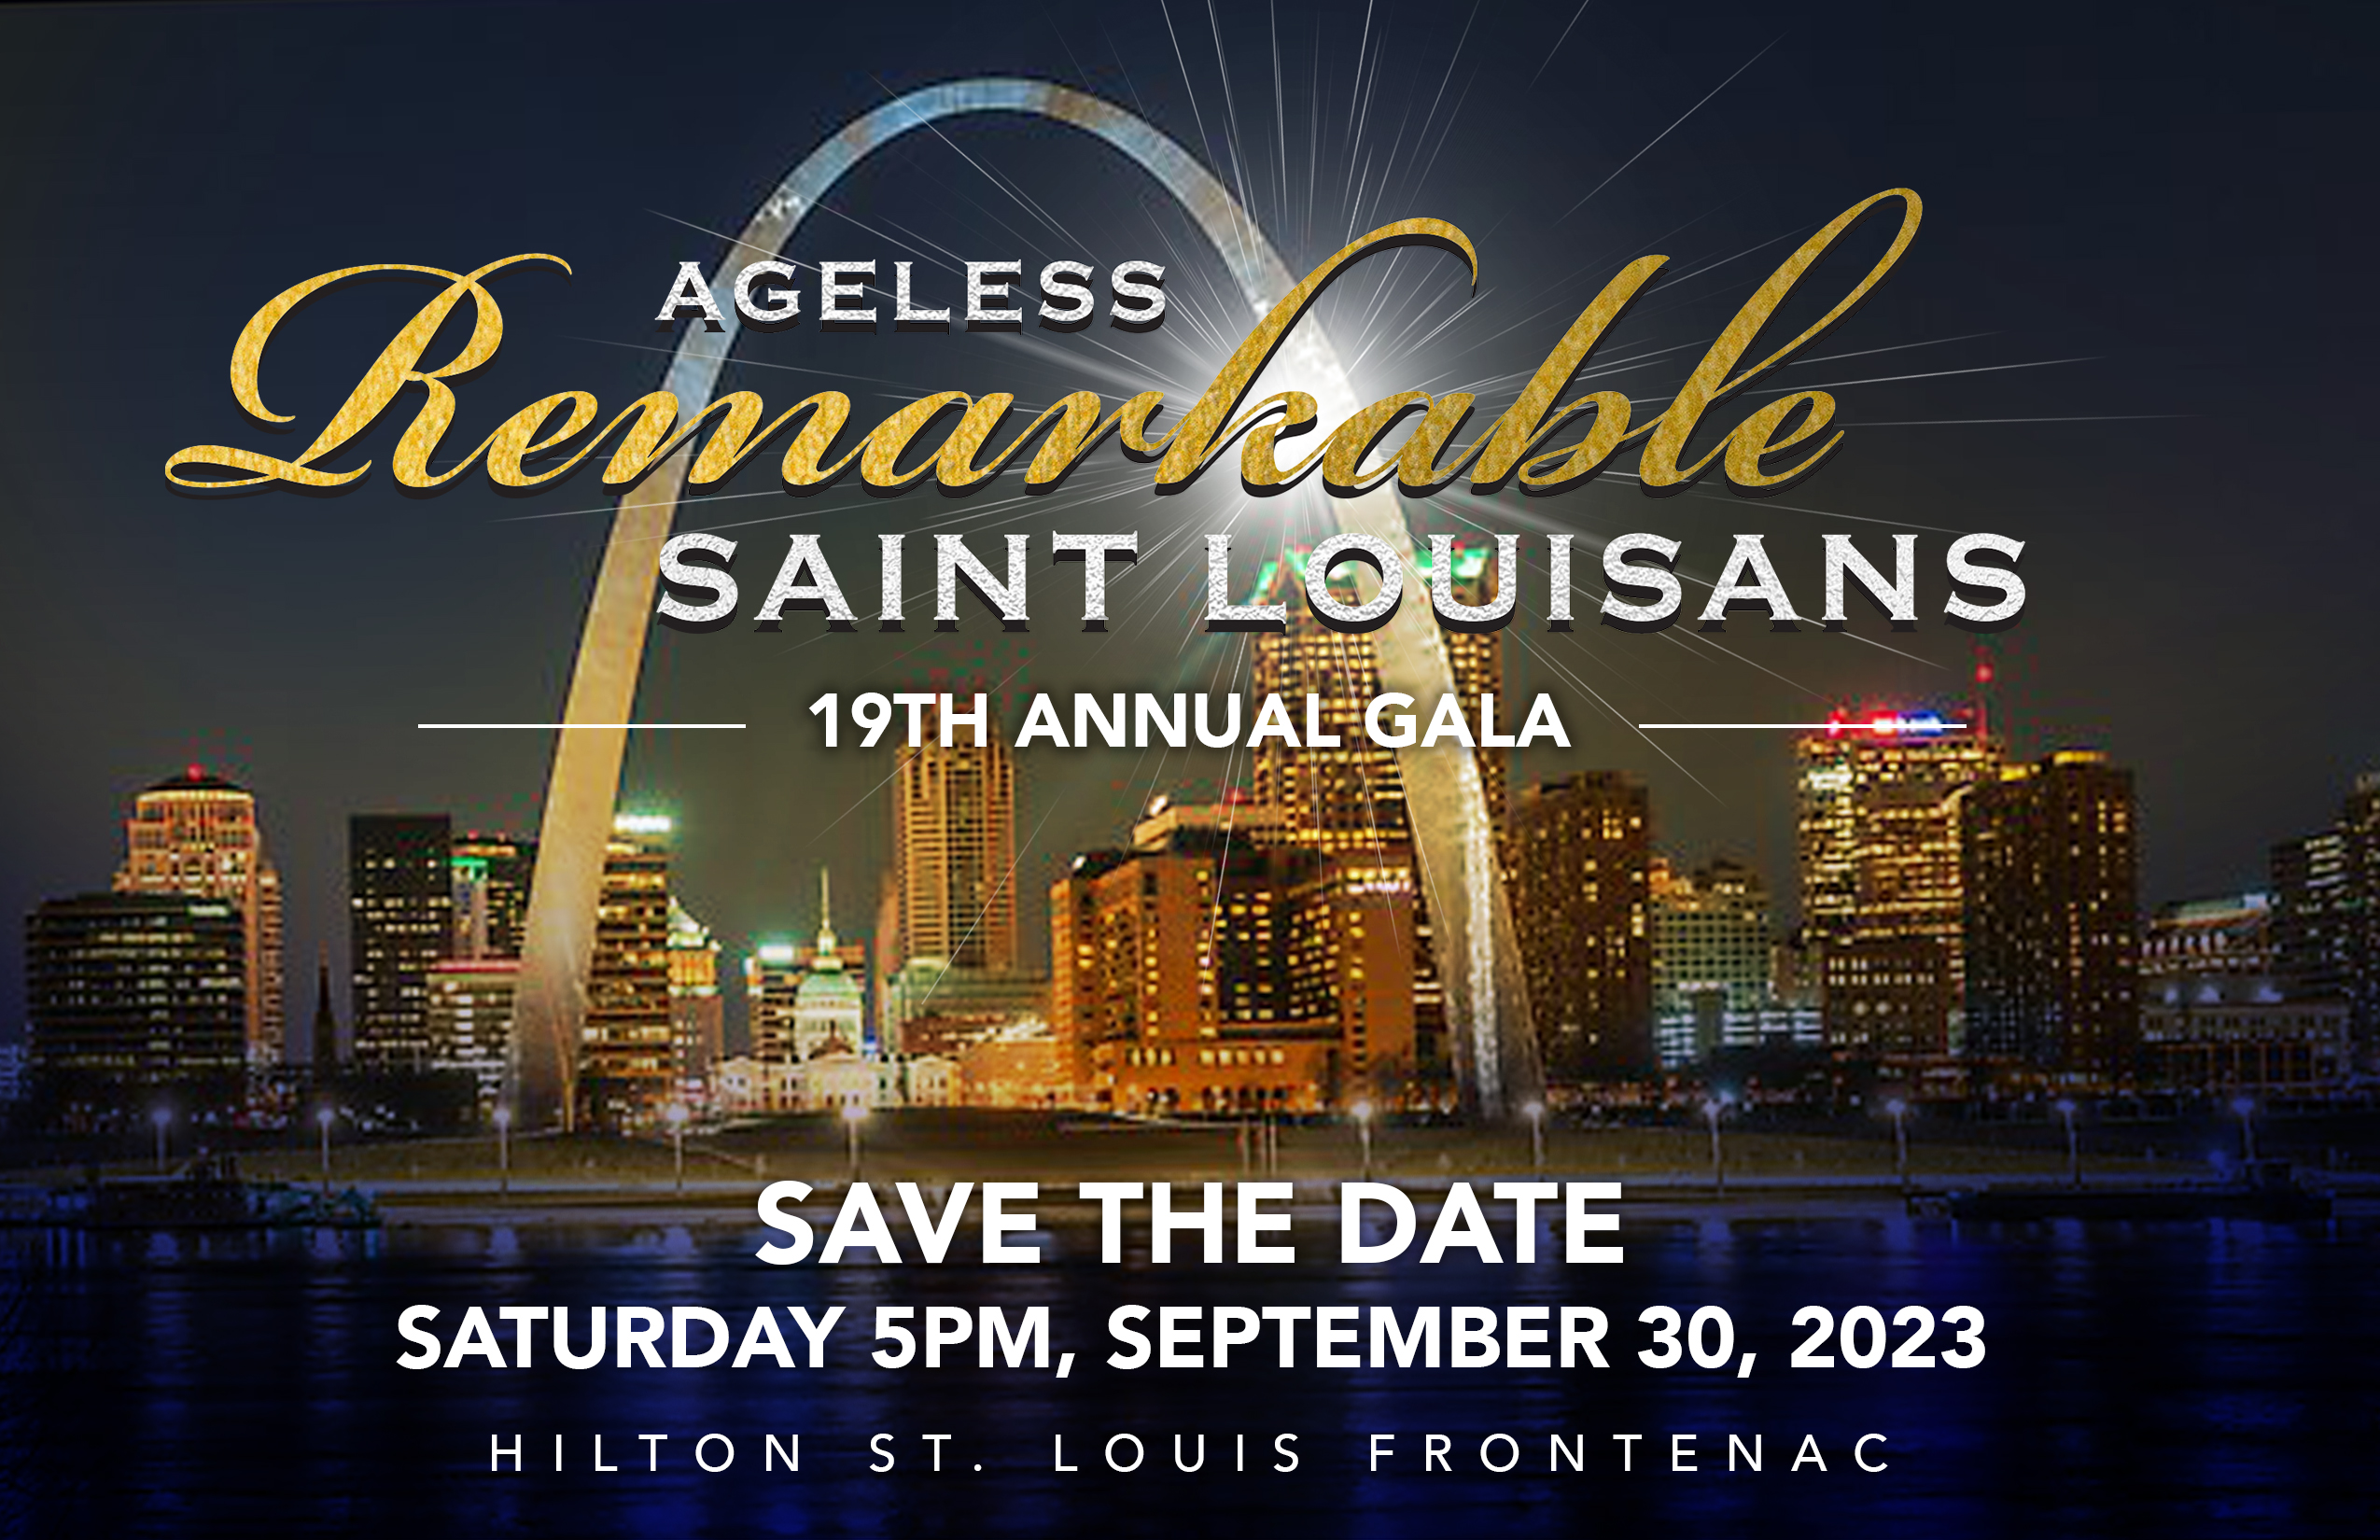 Ageless Remarkable St. Louisans 19th Annual Gala